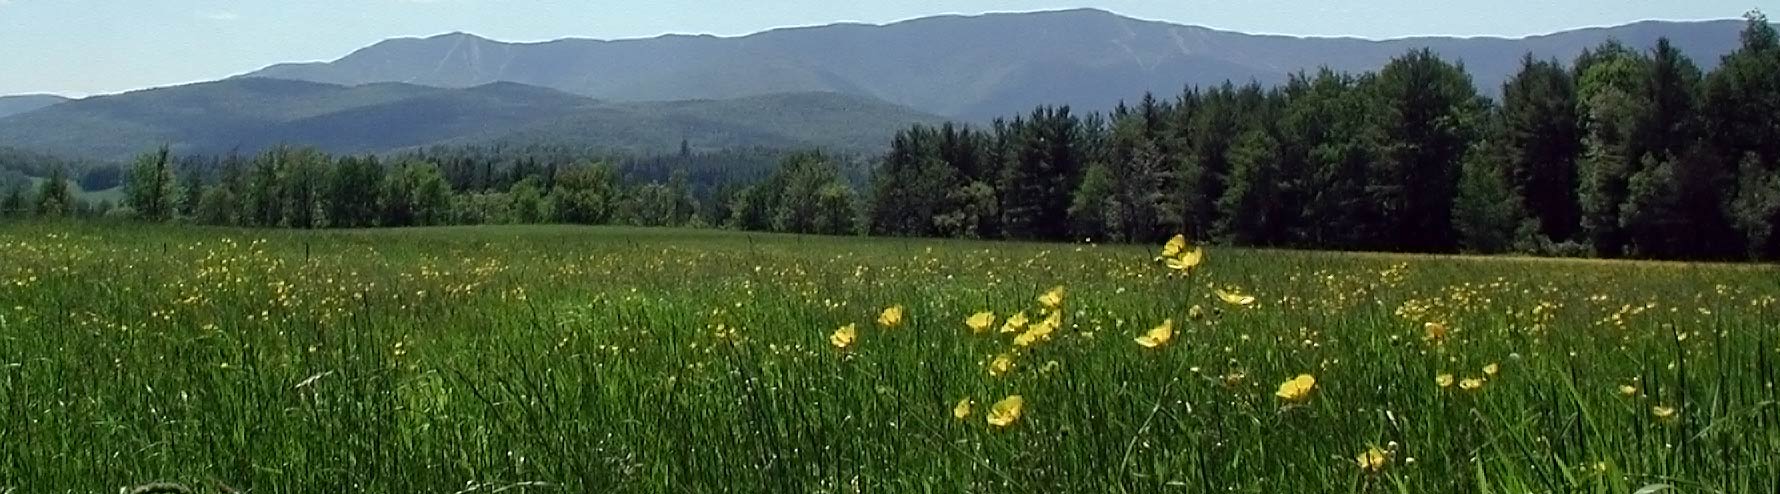 Field of flowers with mountains in the background in Vermont